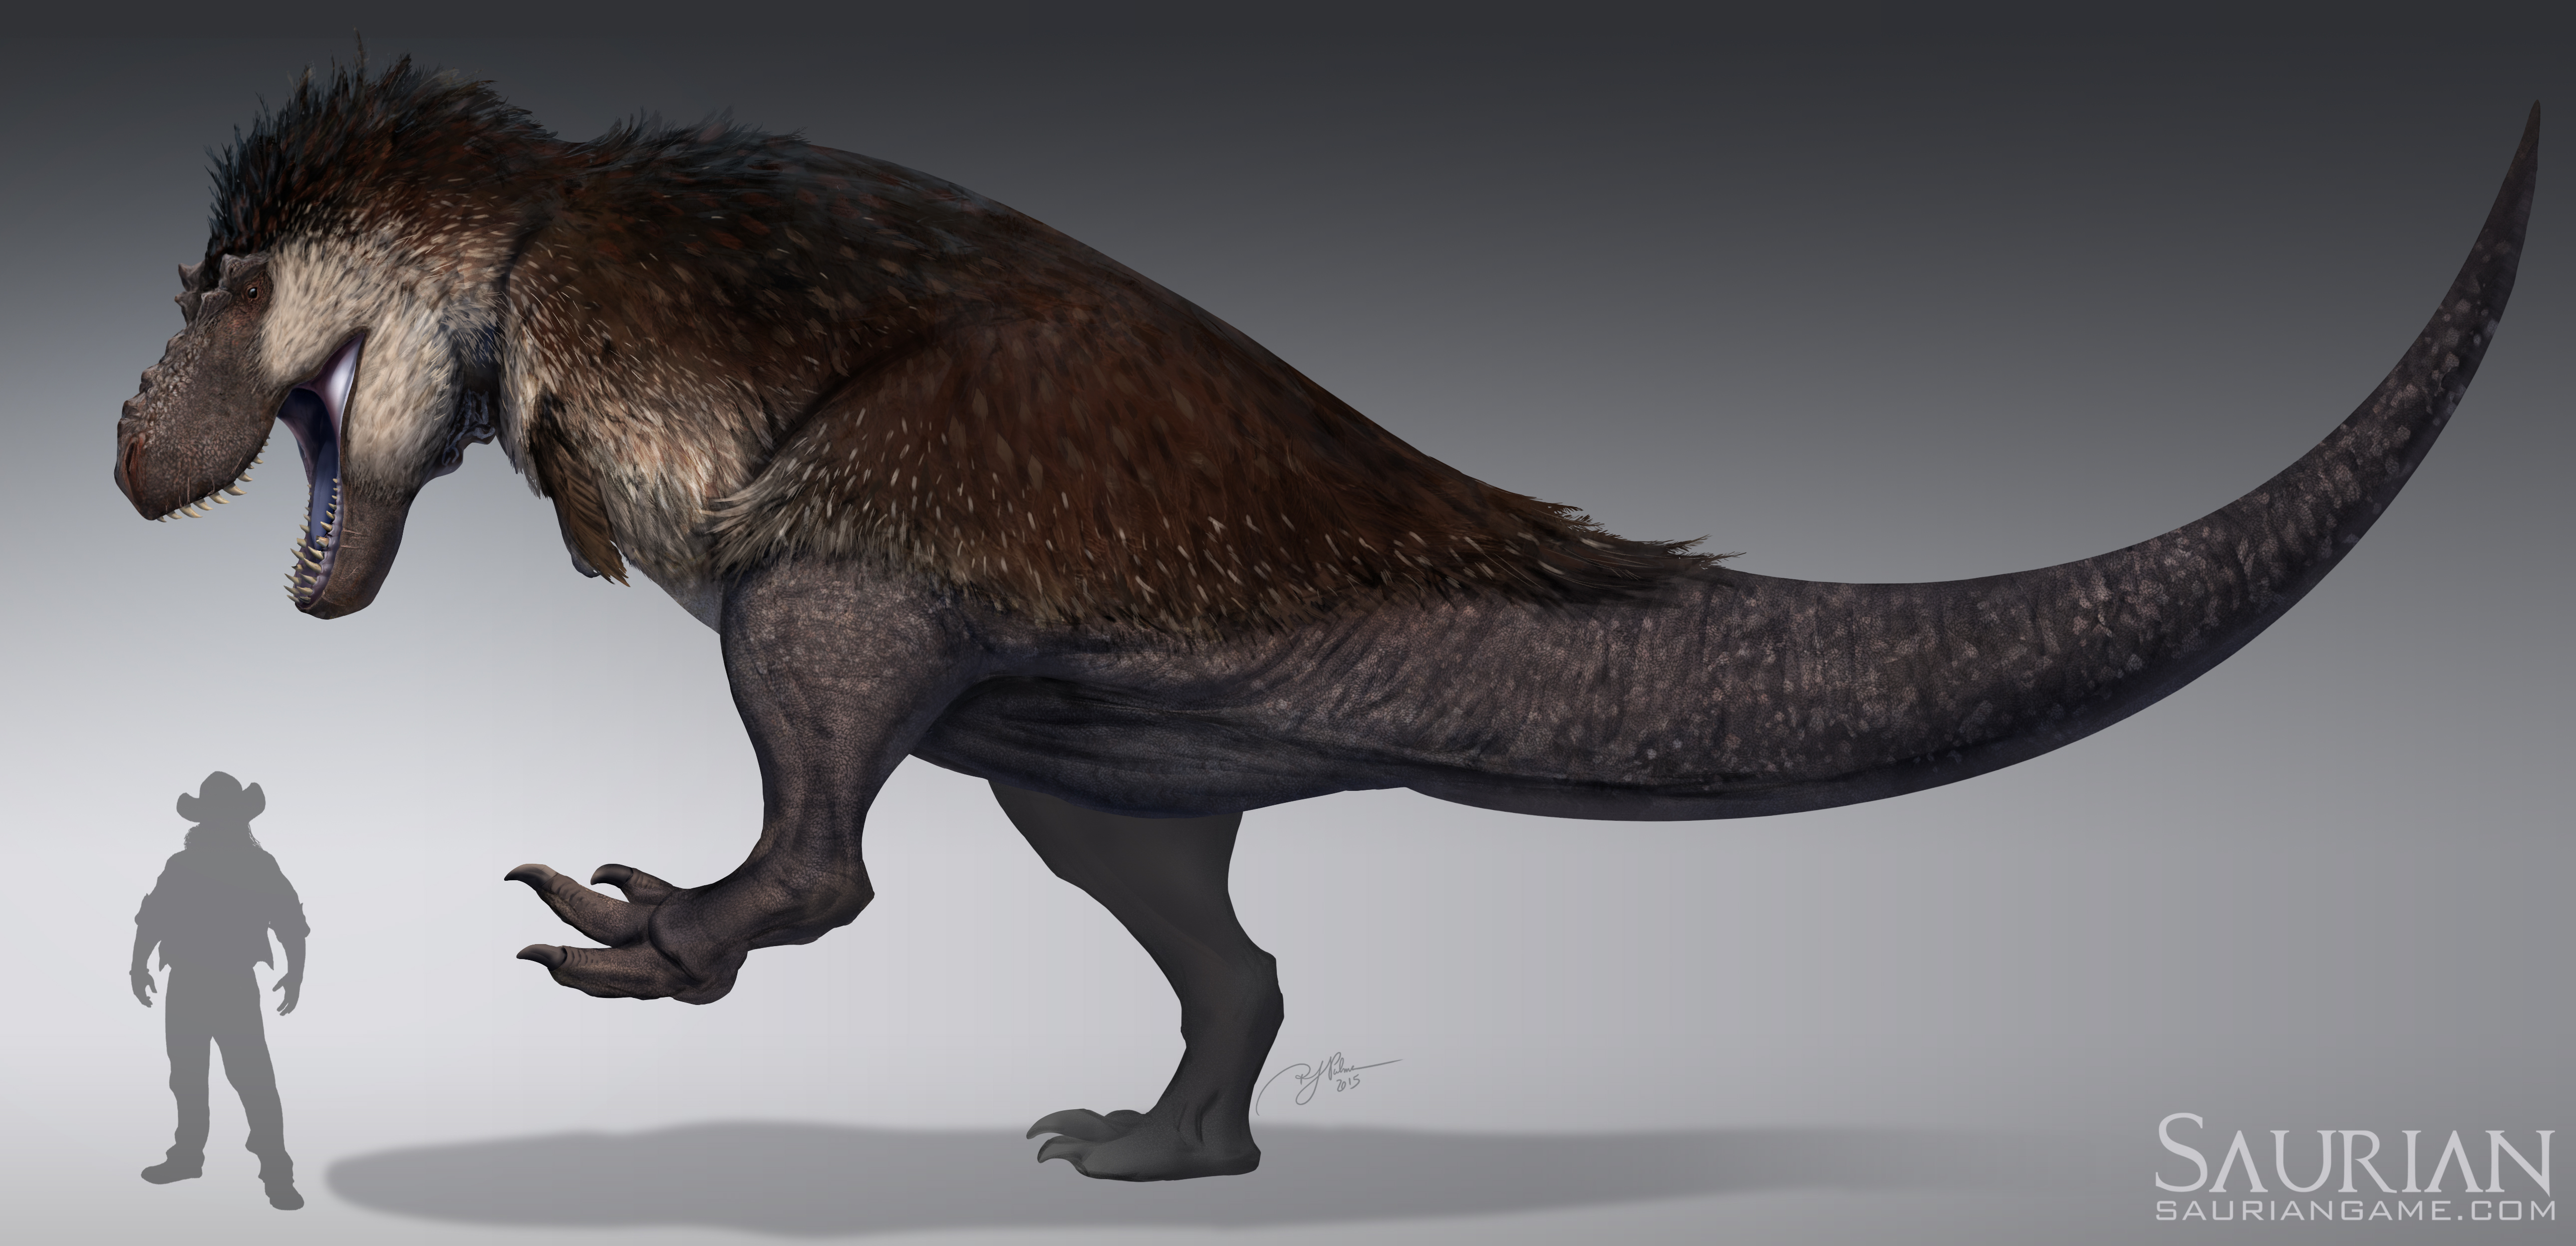 Dino Art] What the preggers T-rex may have looked like. What's the  consensus on proto-feathers? : r/Dinosaurs